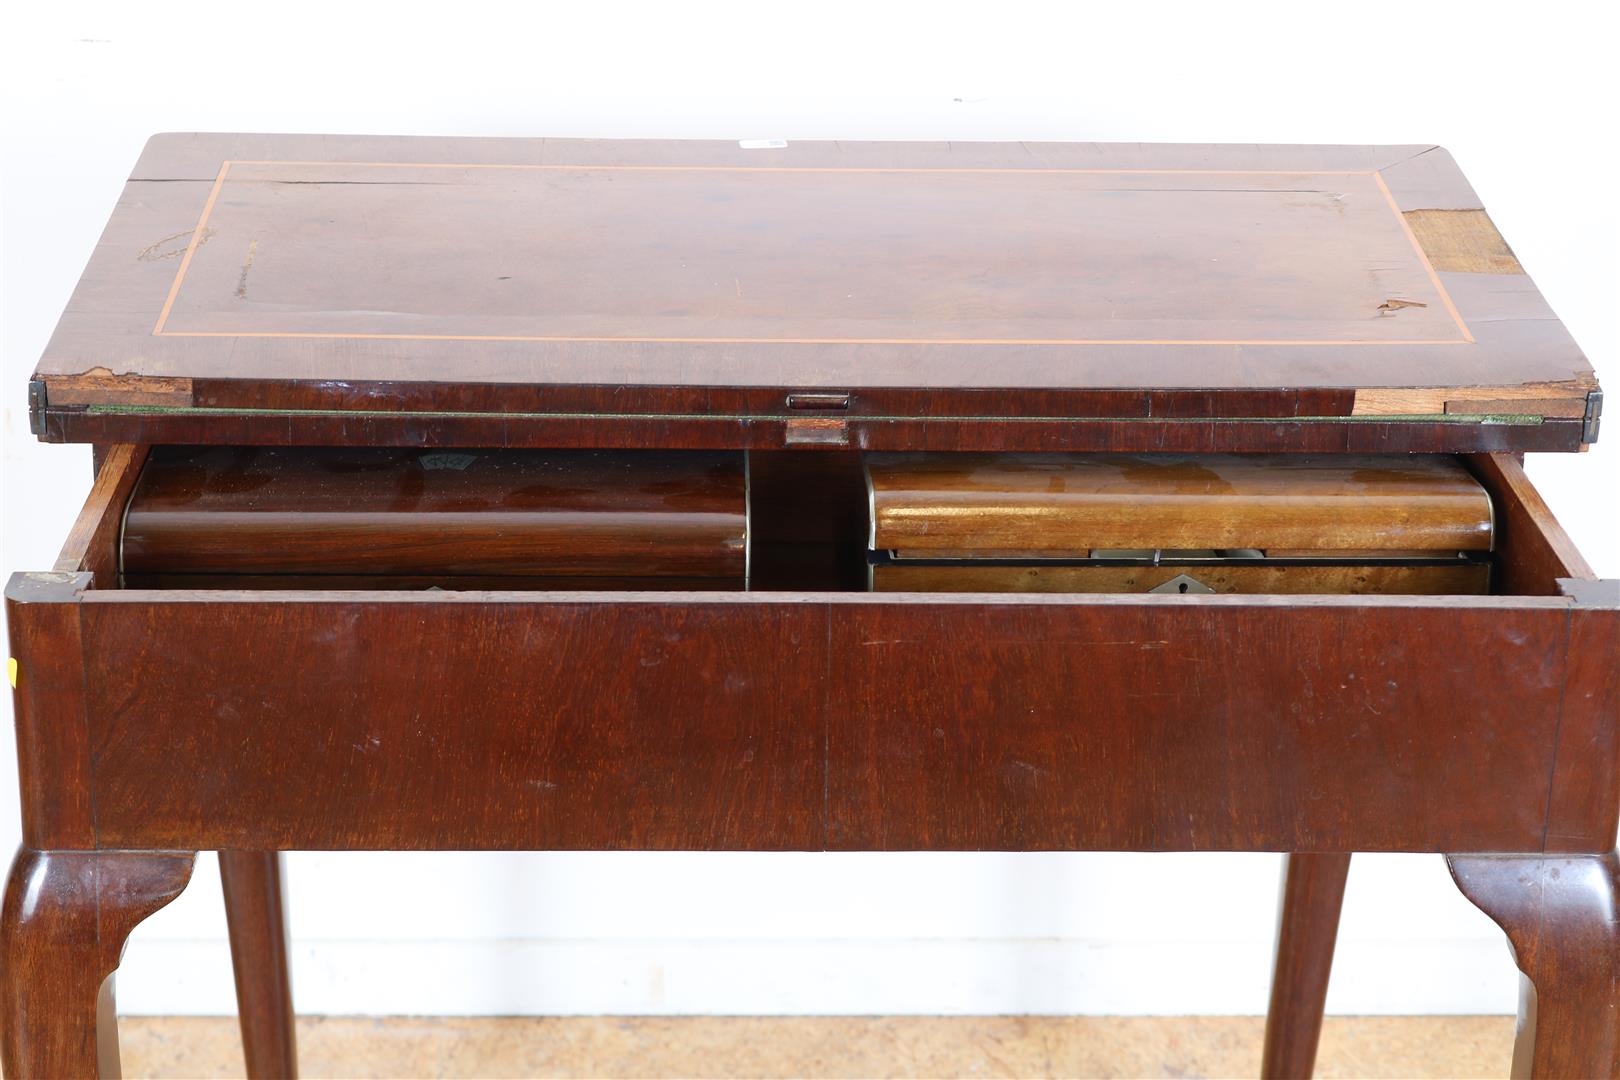 Mahogany Queen Anne style game table with green felt inlaid top on saber legs, 19th century, 74 x 70 - Image 3 of 5